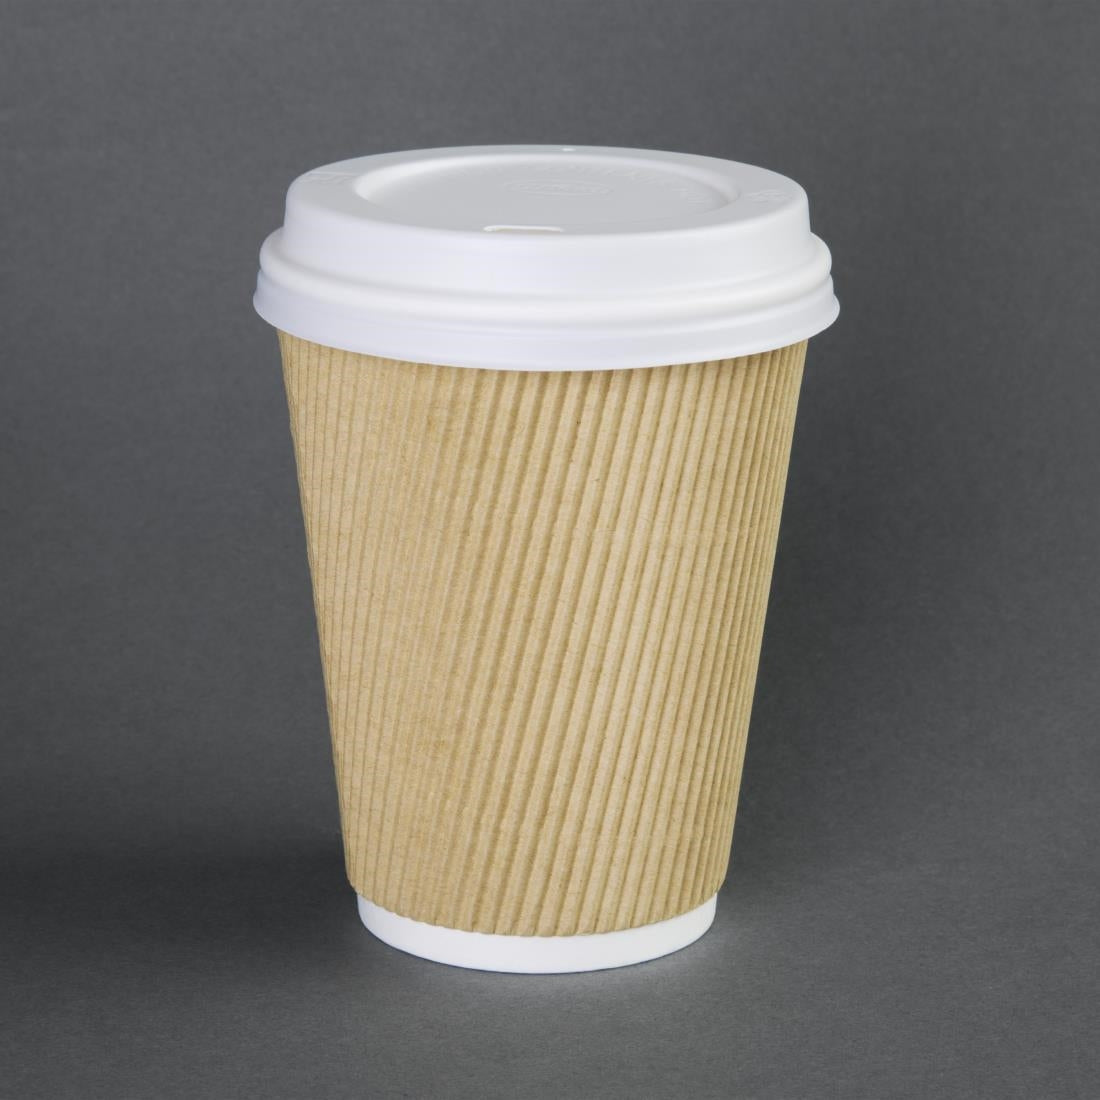 Fiesta Disposable Coffee Cup Lids White 225ml / 8oz (Pack of 50) JD Catering Equipment Solutions Ltd